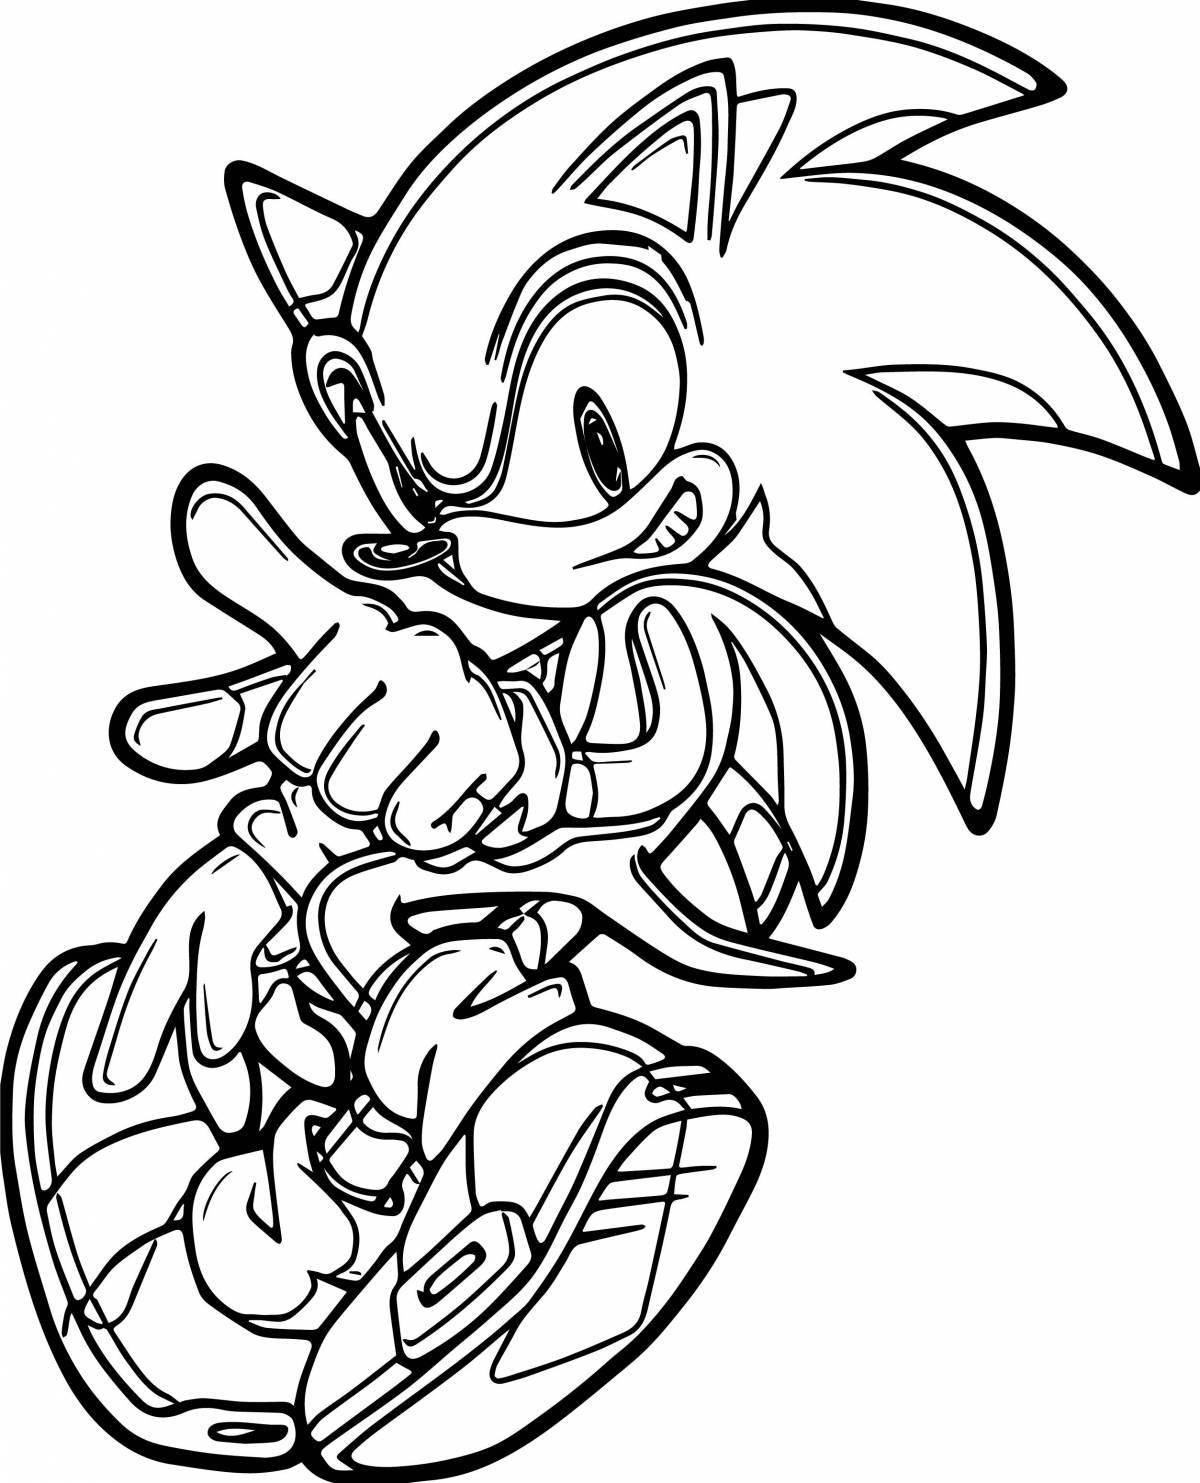 Amazing hyper sonic coloring page